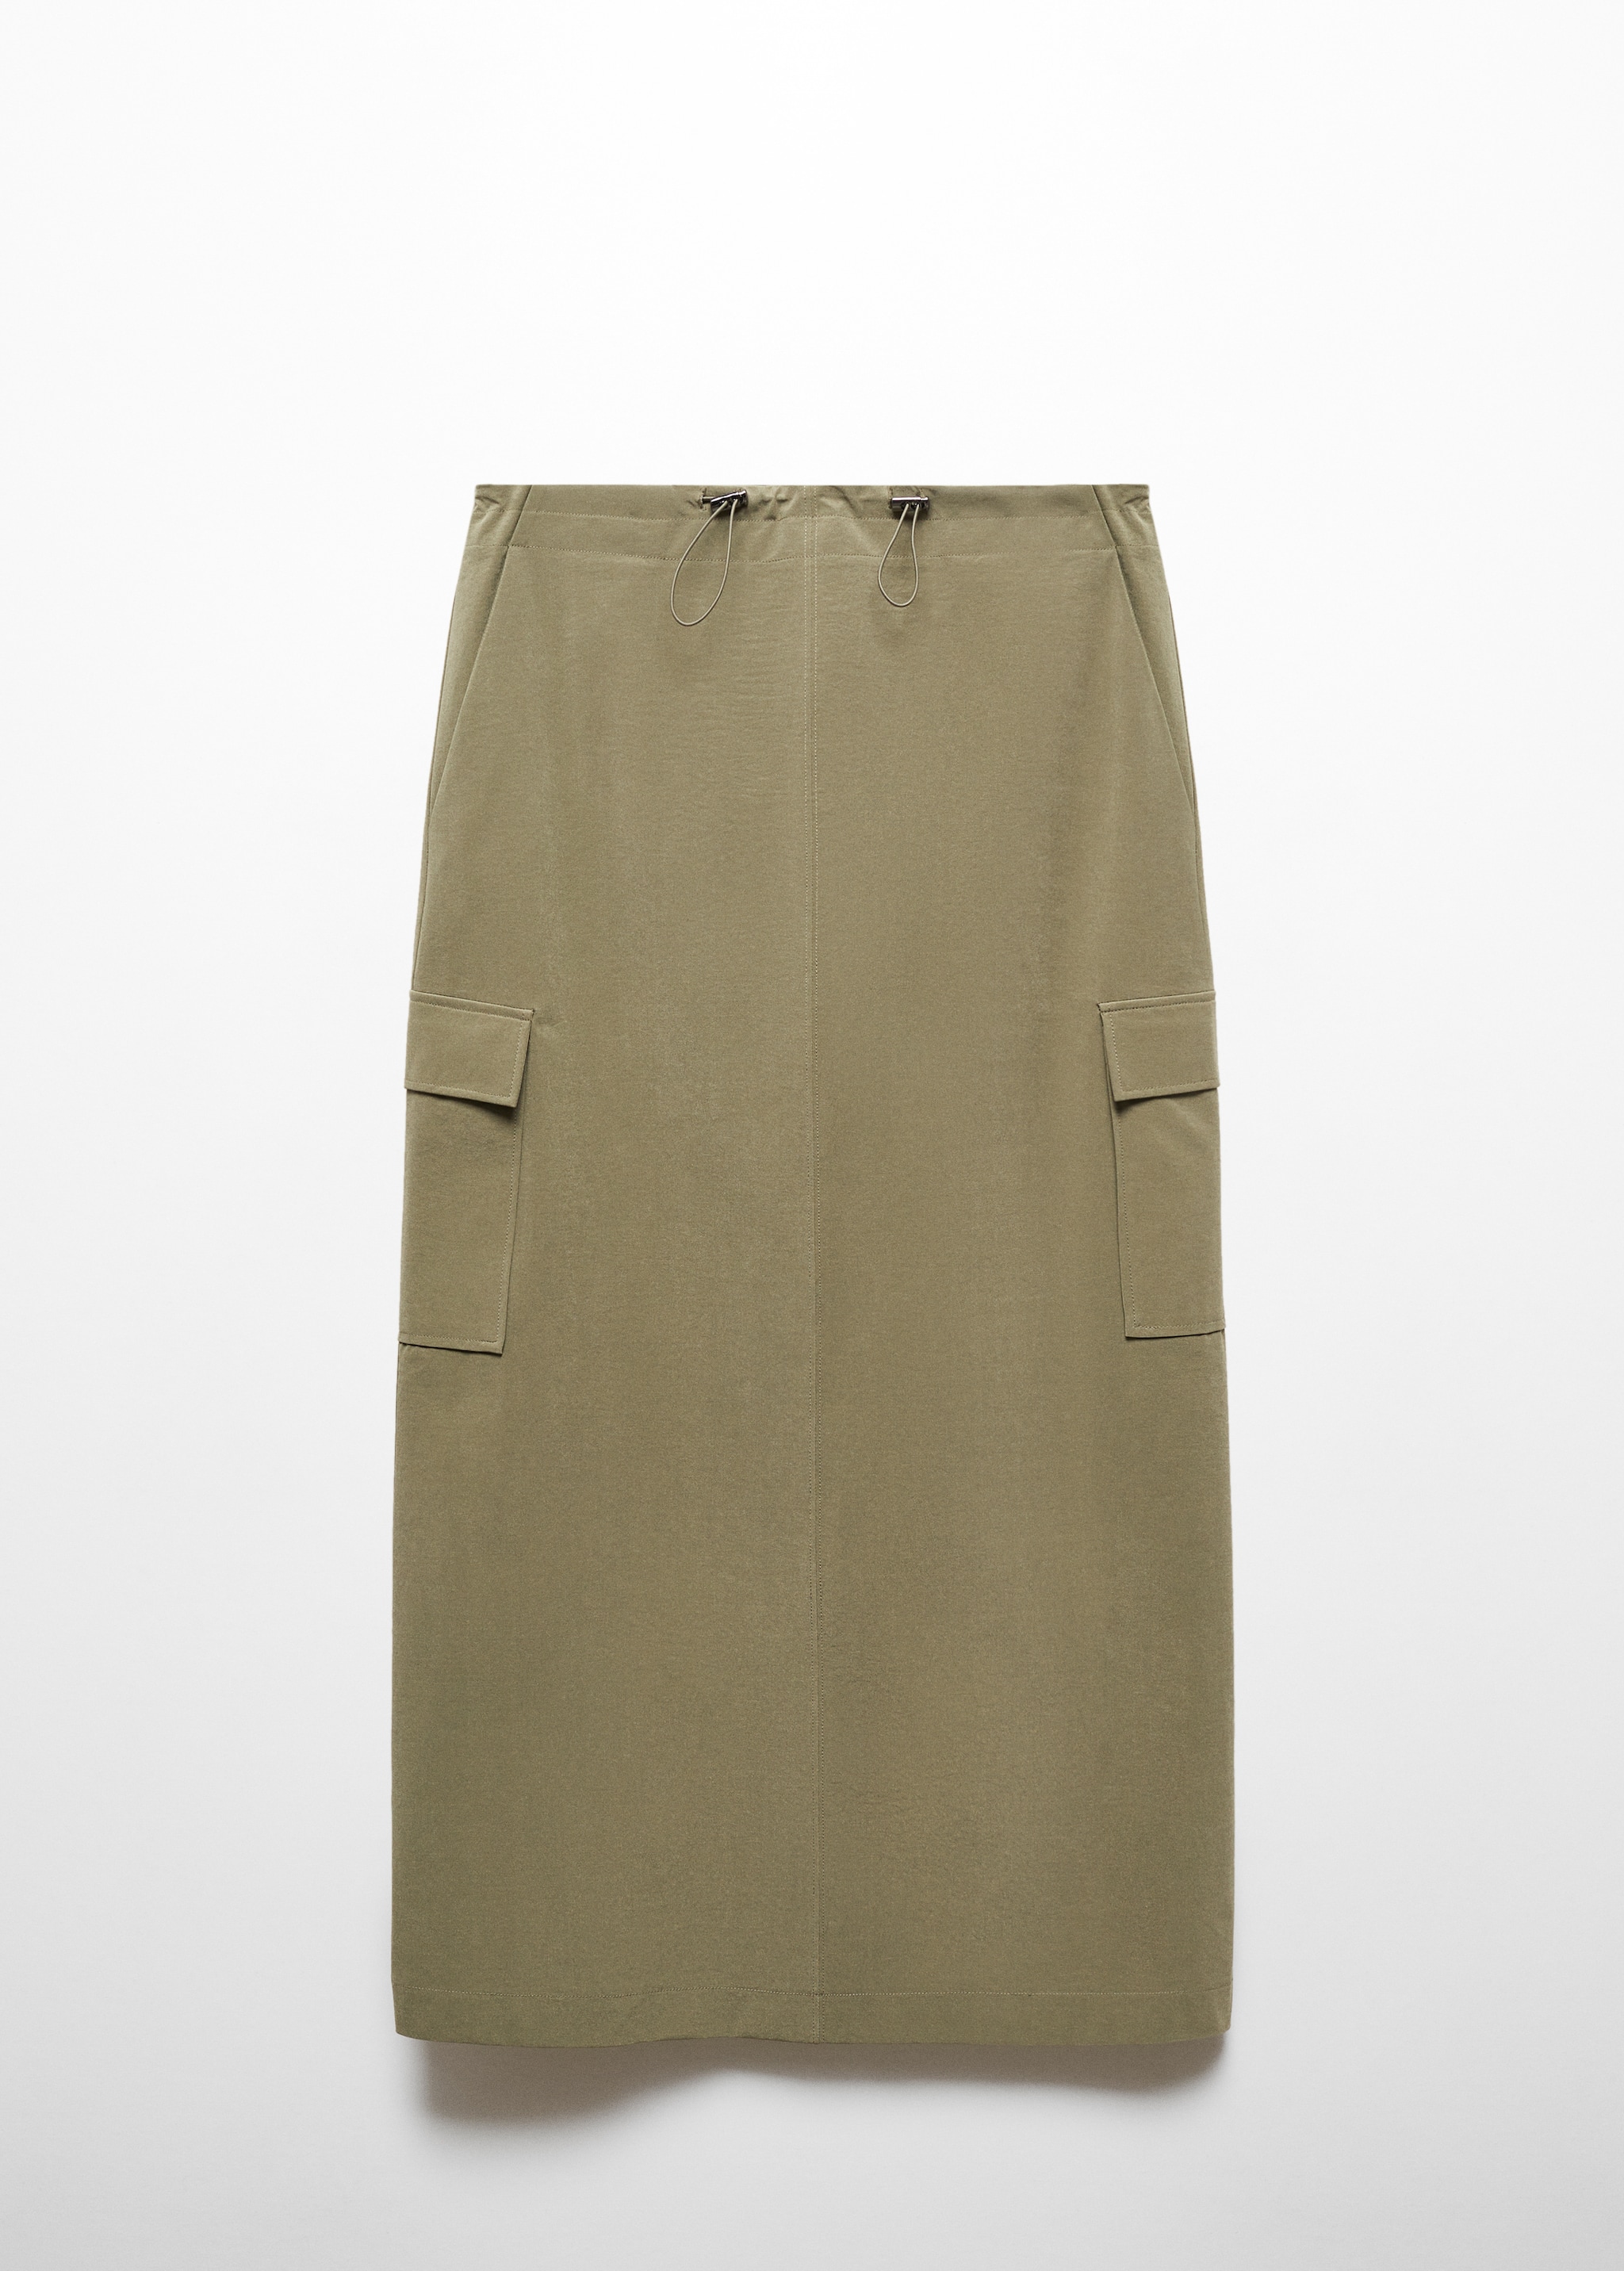 Midi skirt cargo pockets - Article without model